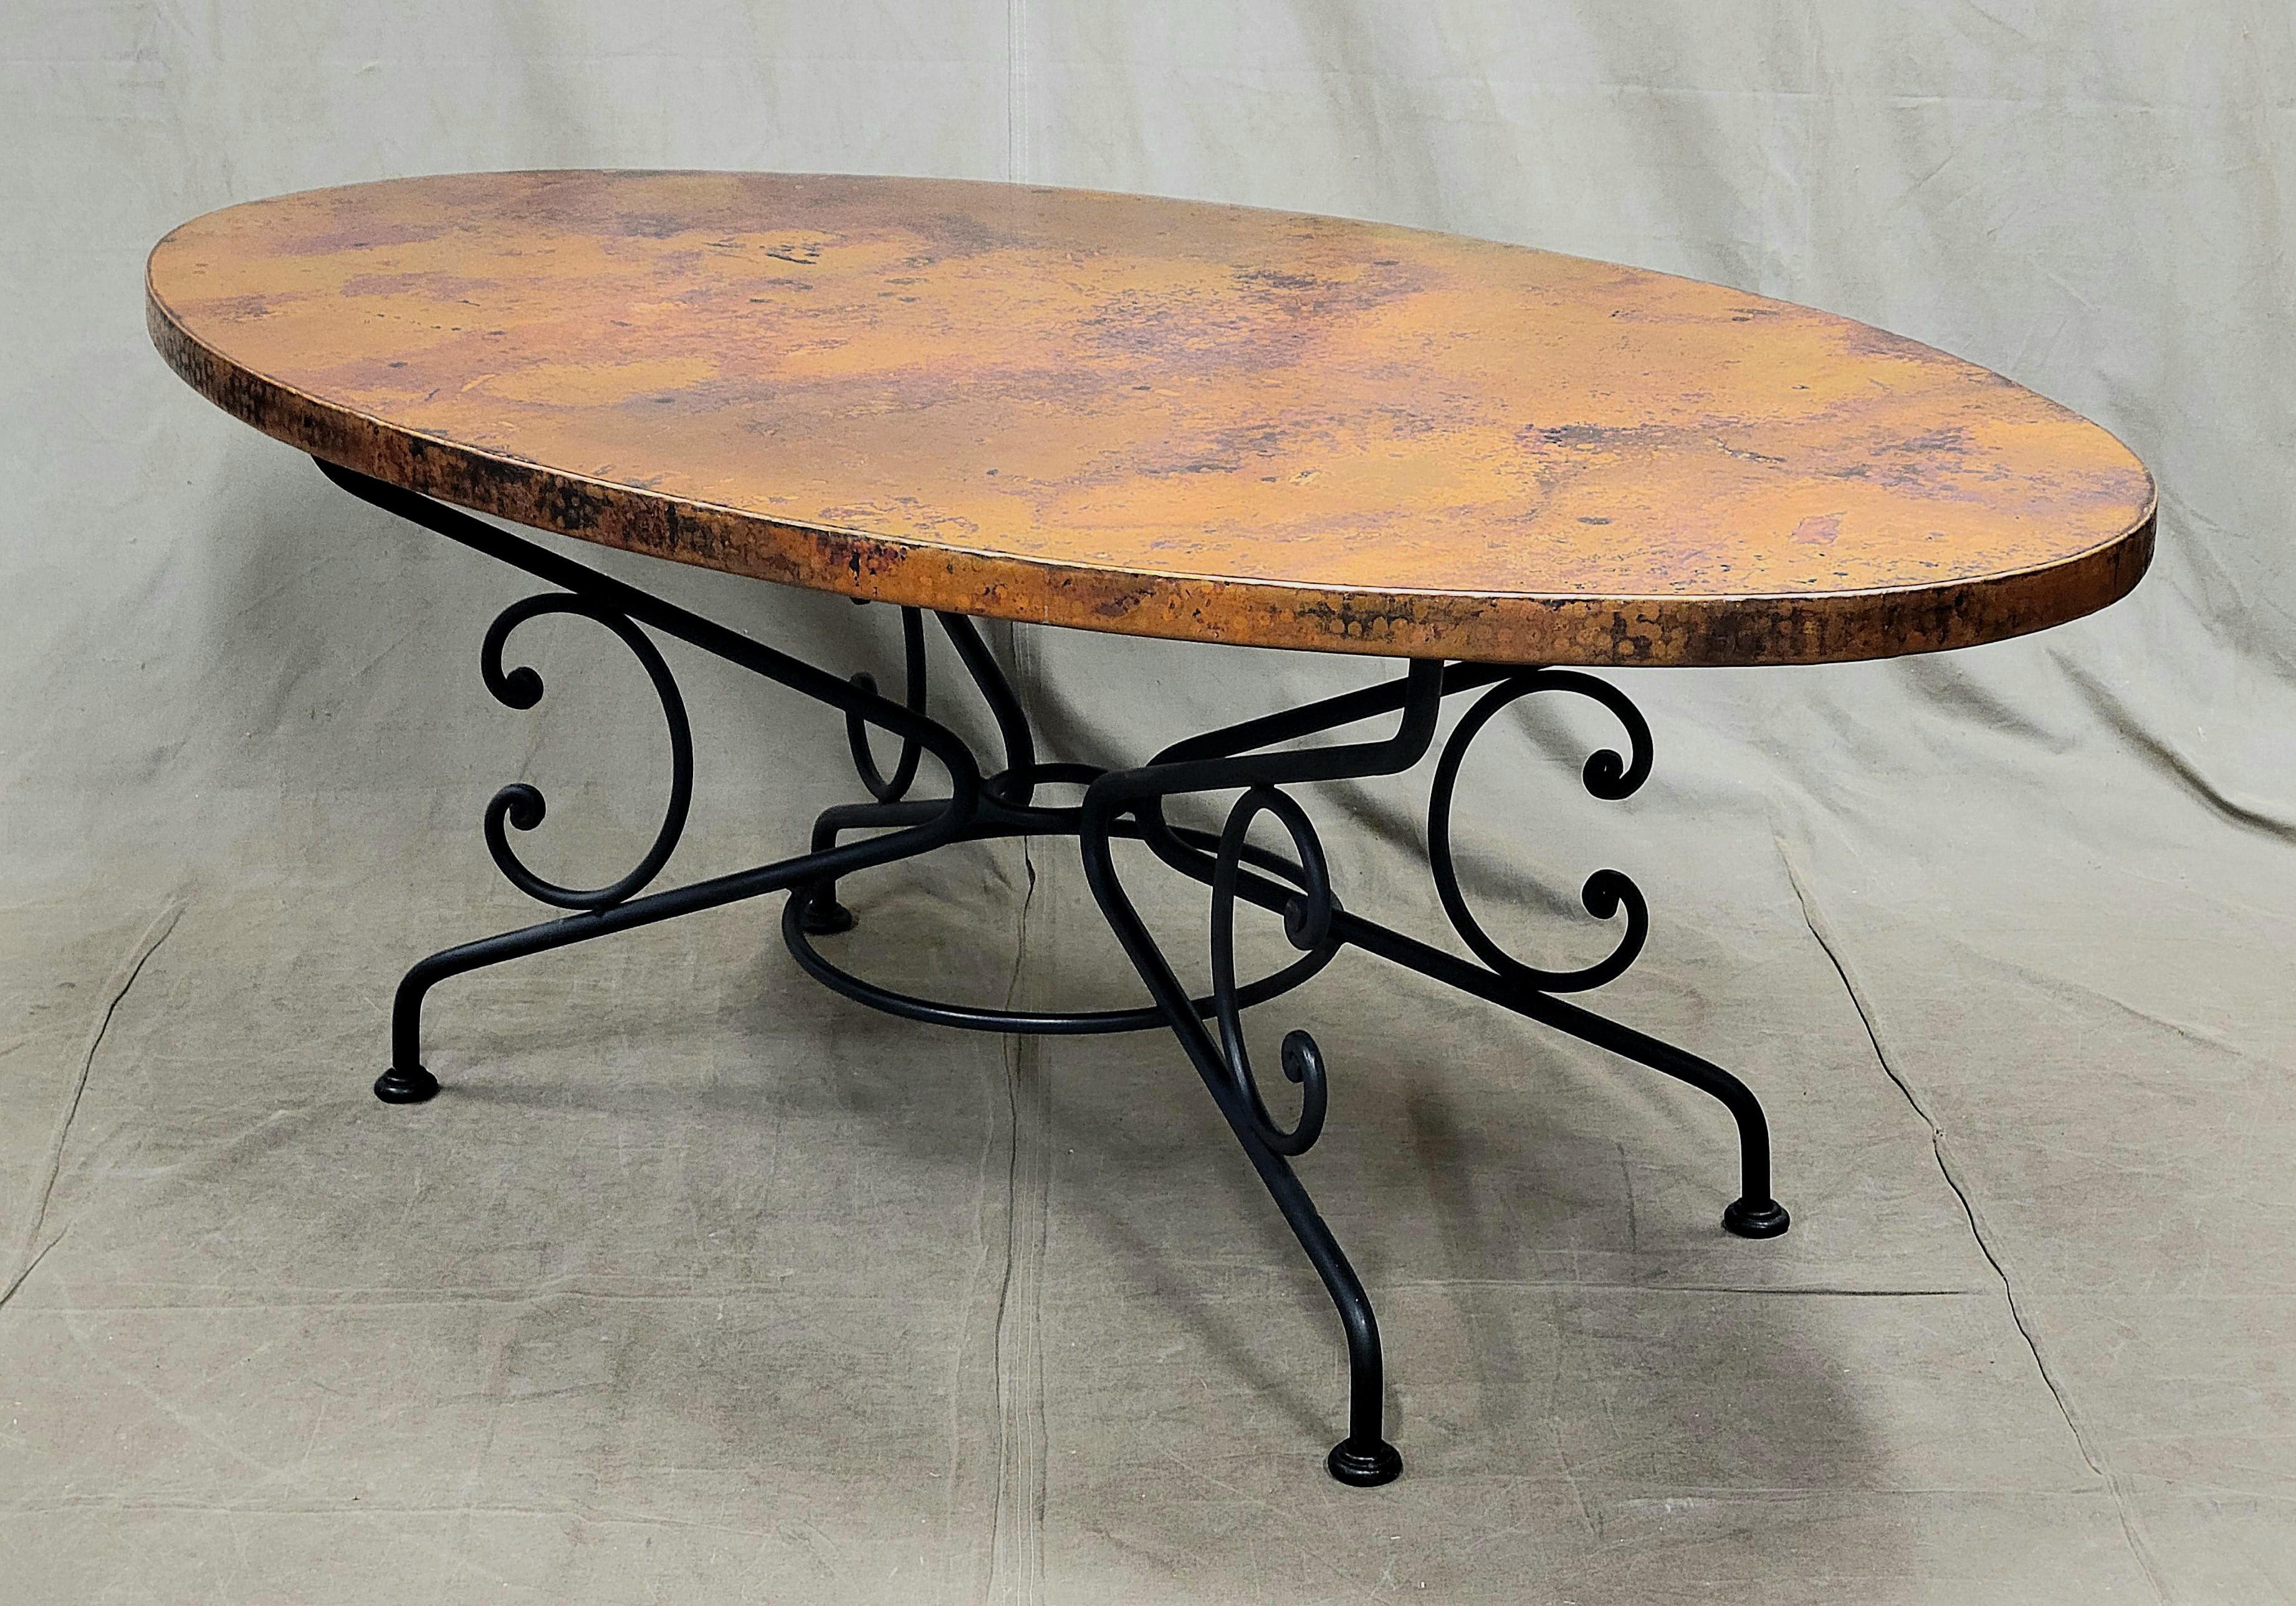 A gorgeous Arhaus hammered and patinated copper top and iron arabesque base oval dining table. A stunning centerpiece of a rustic dining room or kitchen. The surface is sealed with a lacquer so simply wipe down with a damp rag for easy clean up.